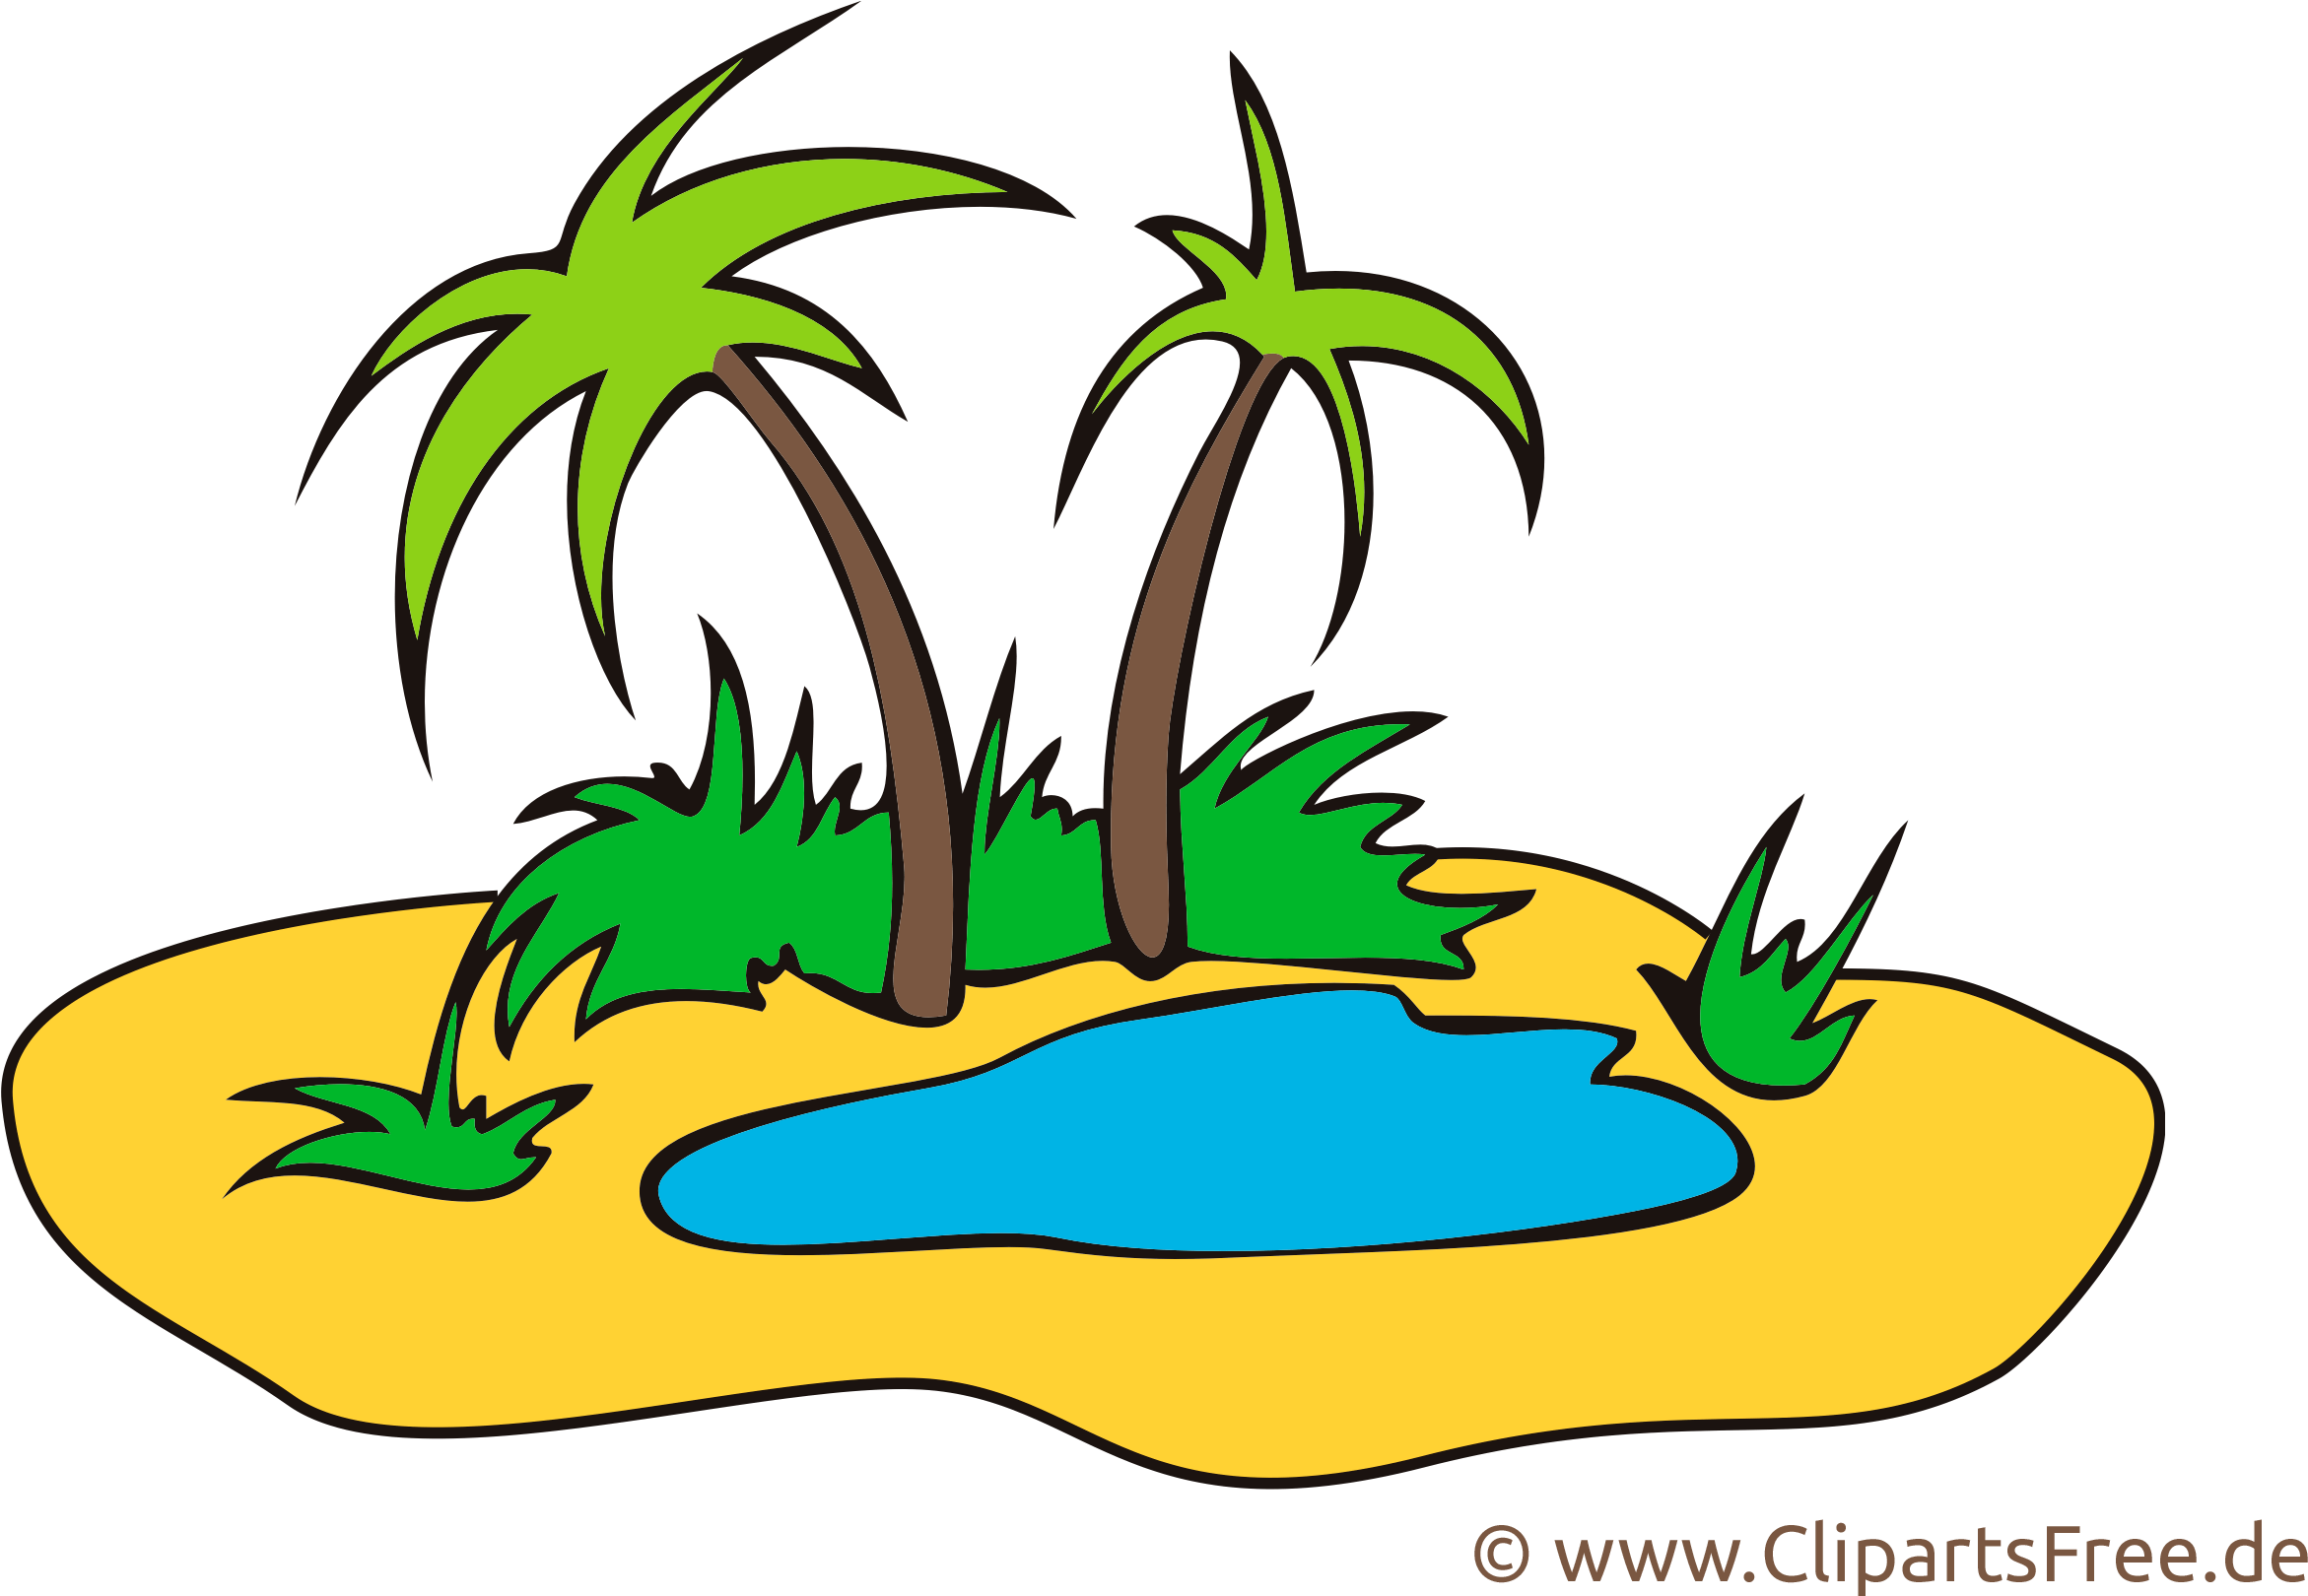 A Cartoon Of Palm Trees And A Small Pond